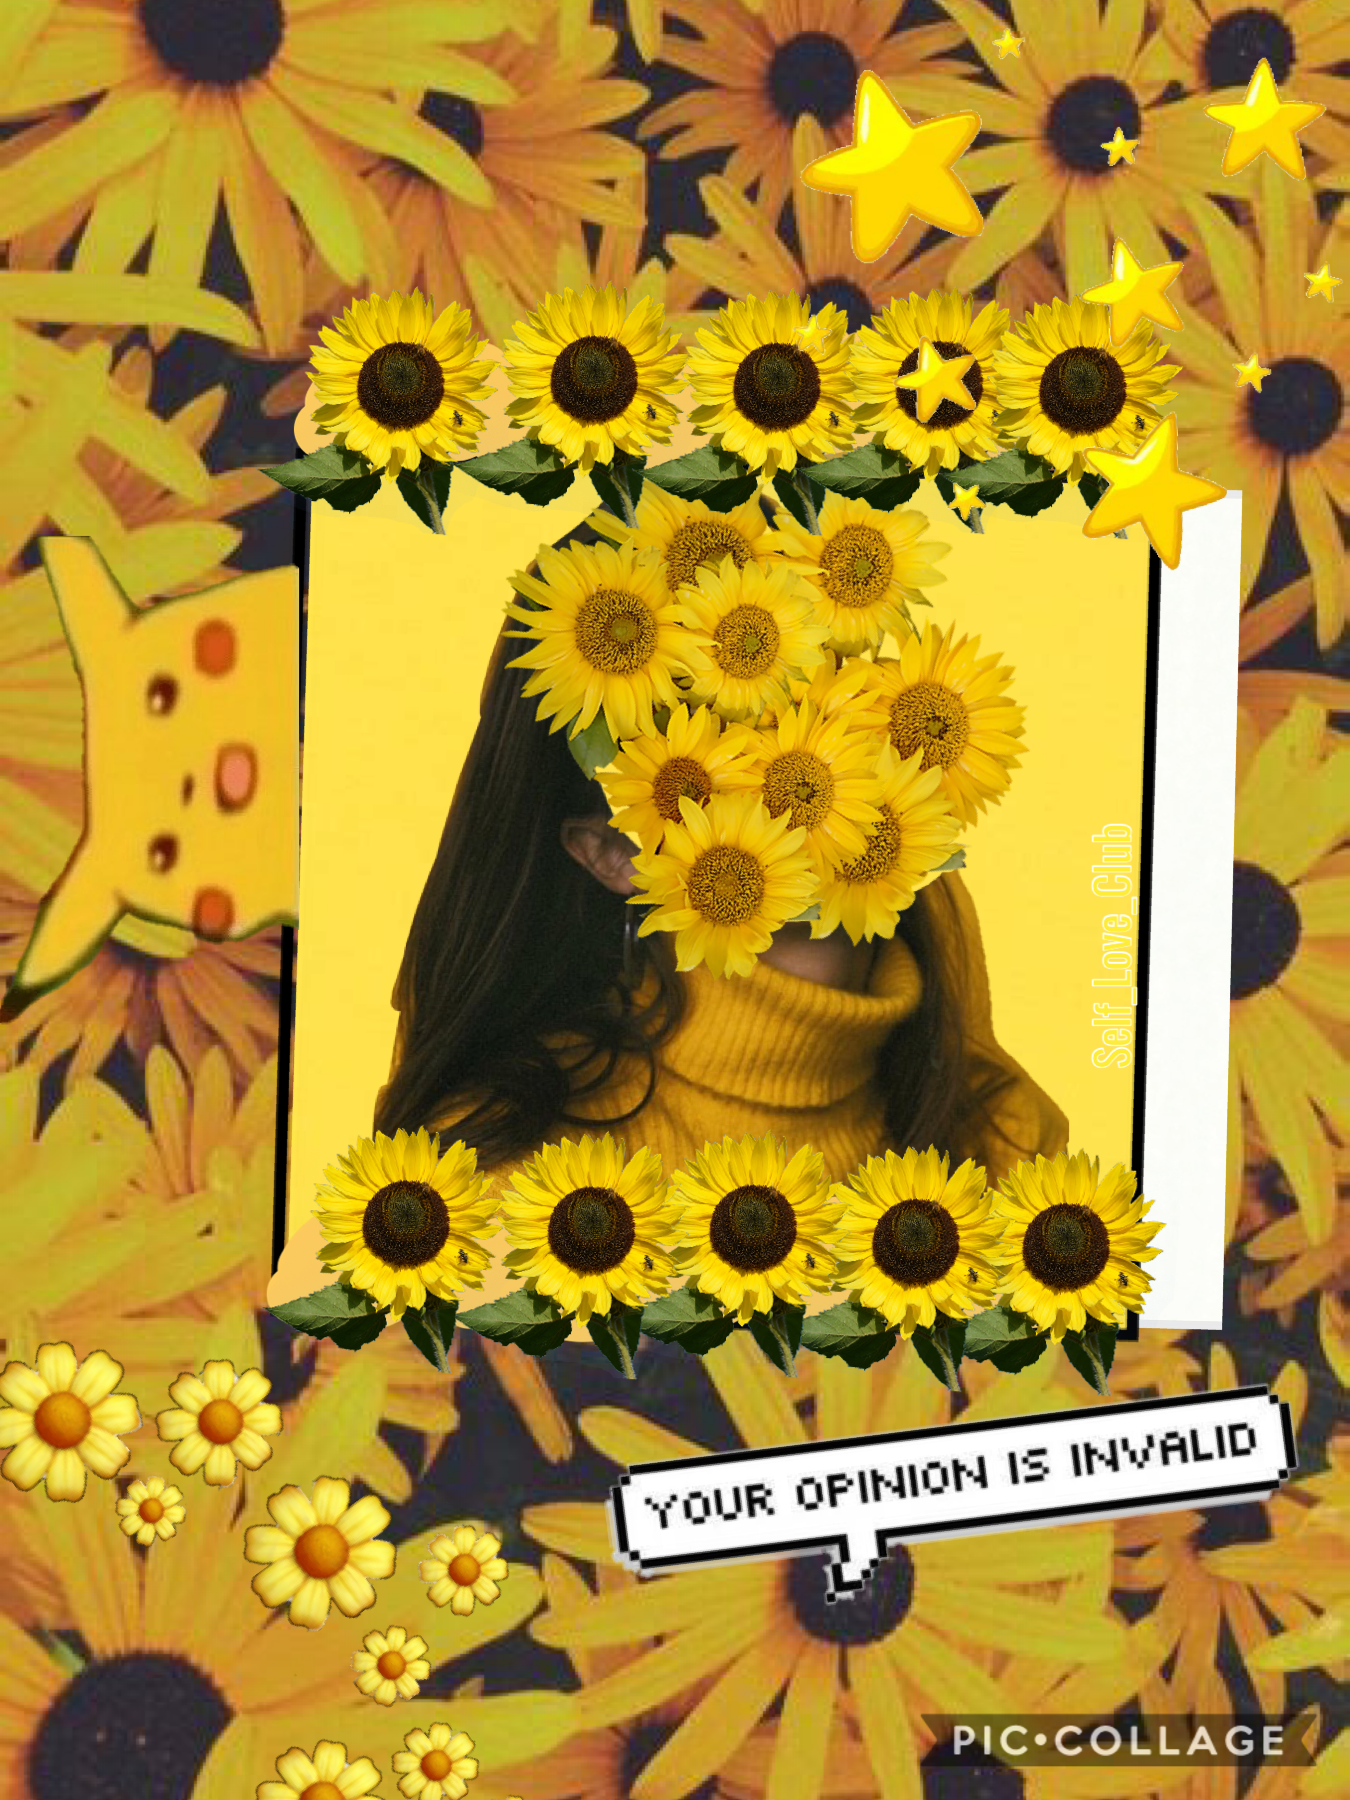 🌻 Tap 🌻 
Lol I just love the “Flower face” thing 😊
QOTD: What’s your favorite emoji 
AOTD: Mine is the drunk face 🥴 
Lol but what is this emoji 👩‍🦲 like is this supposed to be offensive or what?? Lol lol lol 
#Whatsyourfavoriteemoji  #Whatiathis👩‍🦲